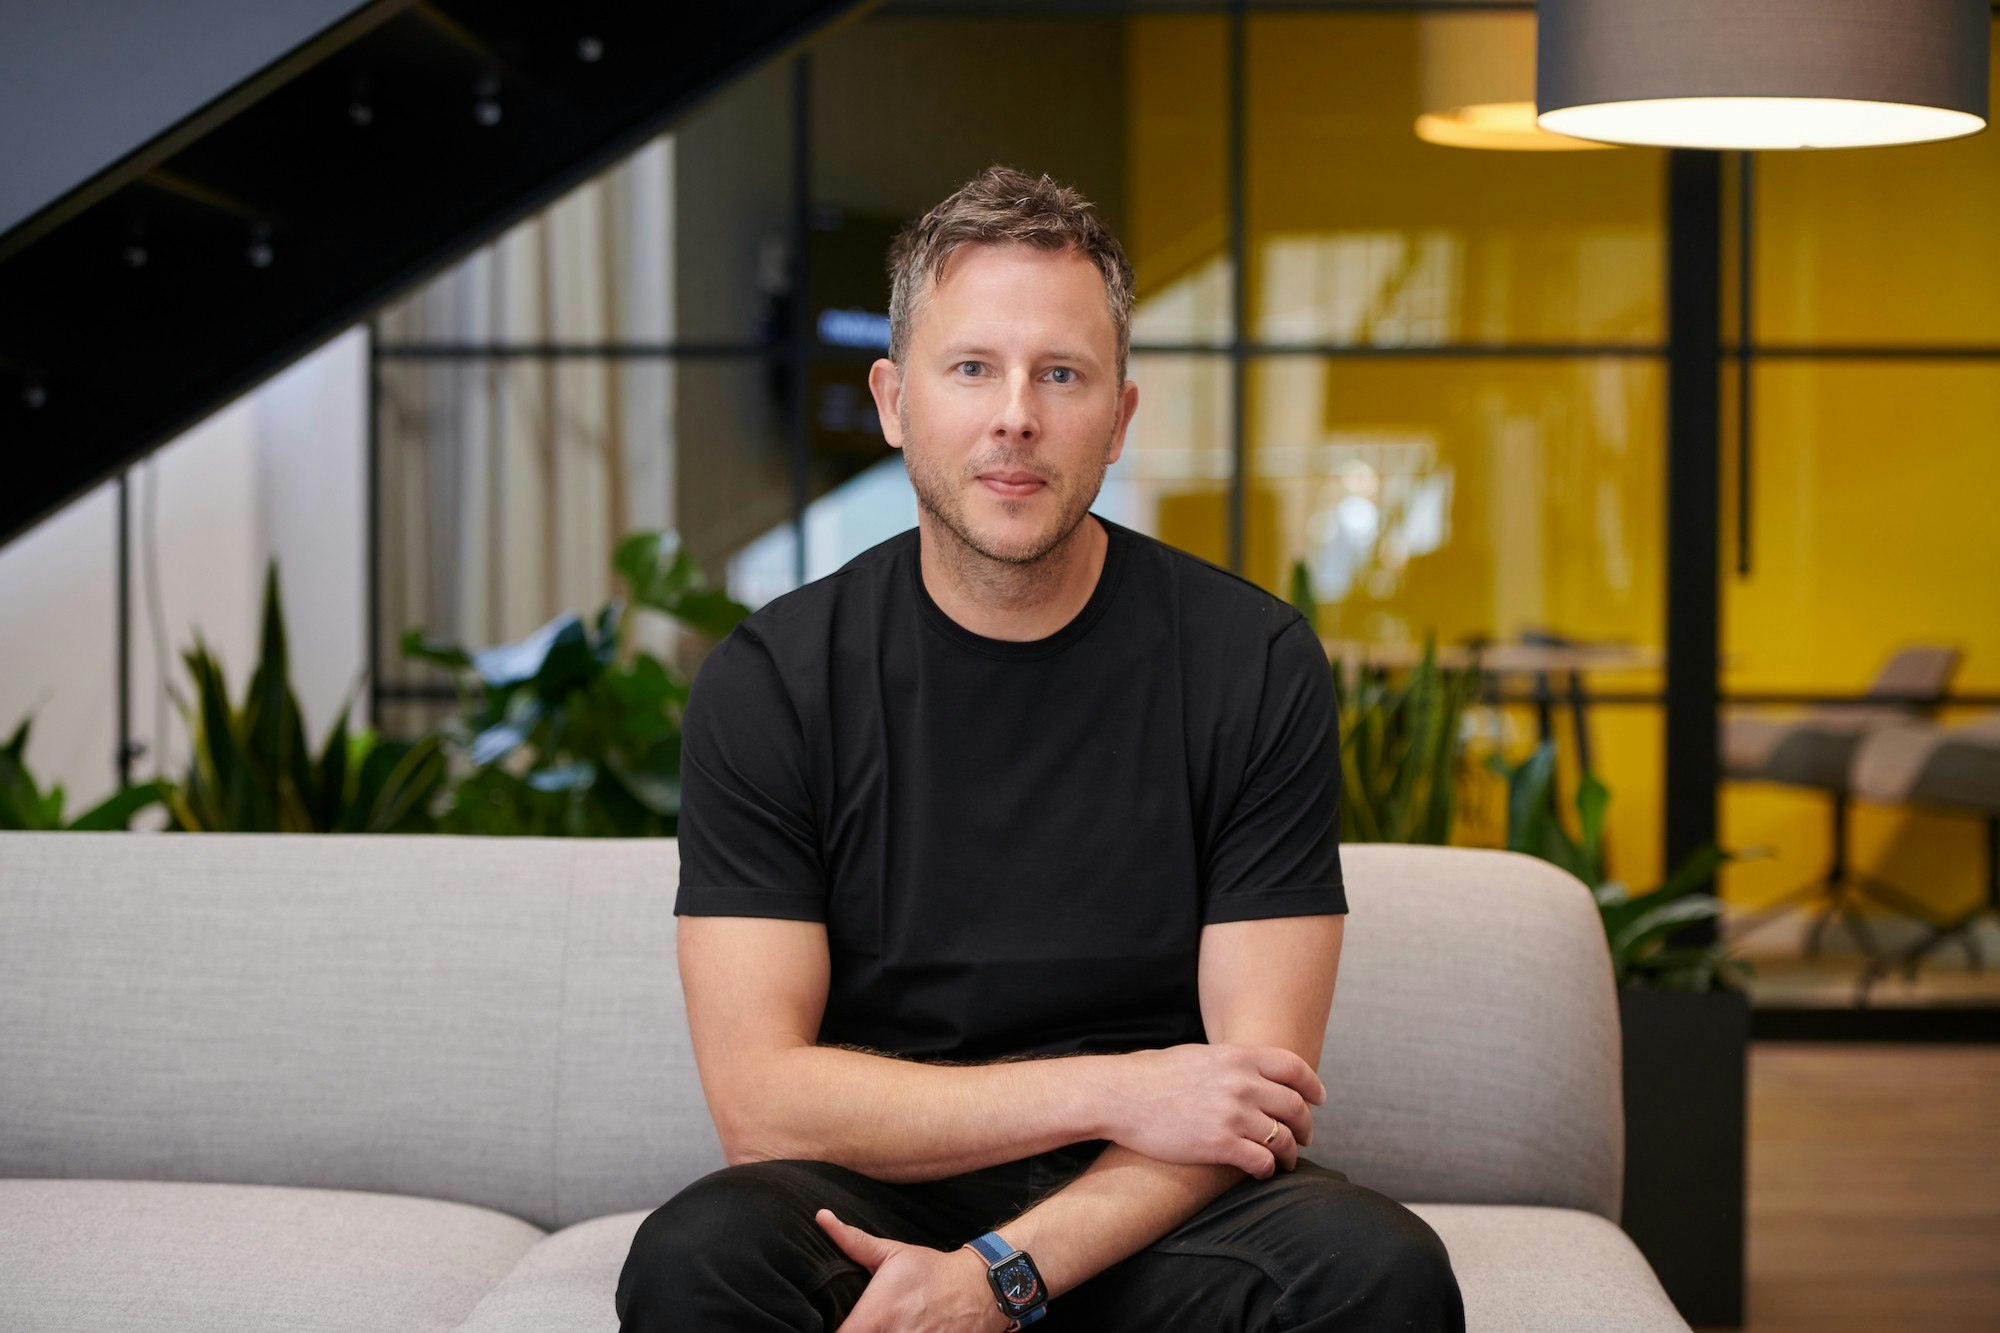 Corporate shot of Tom Leathes, CEO and cofounder of Motorway, sitting on a sofa